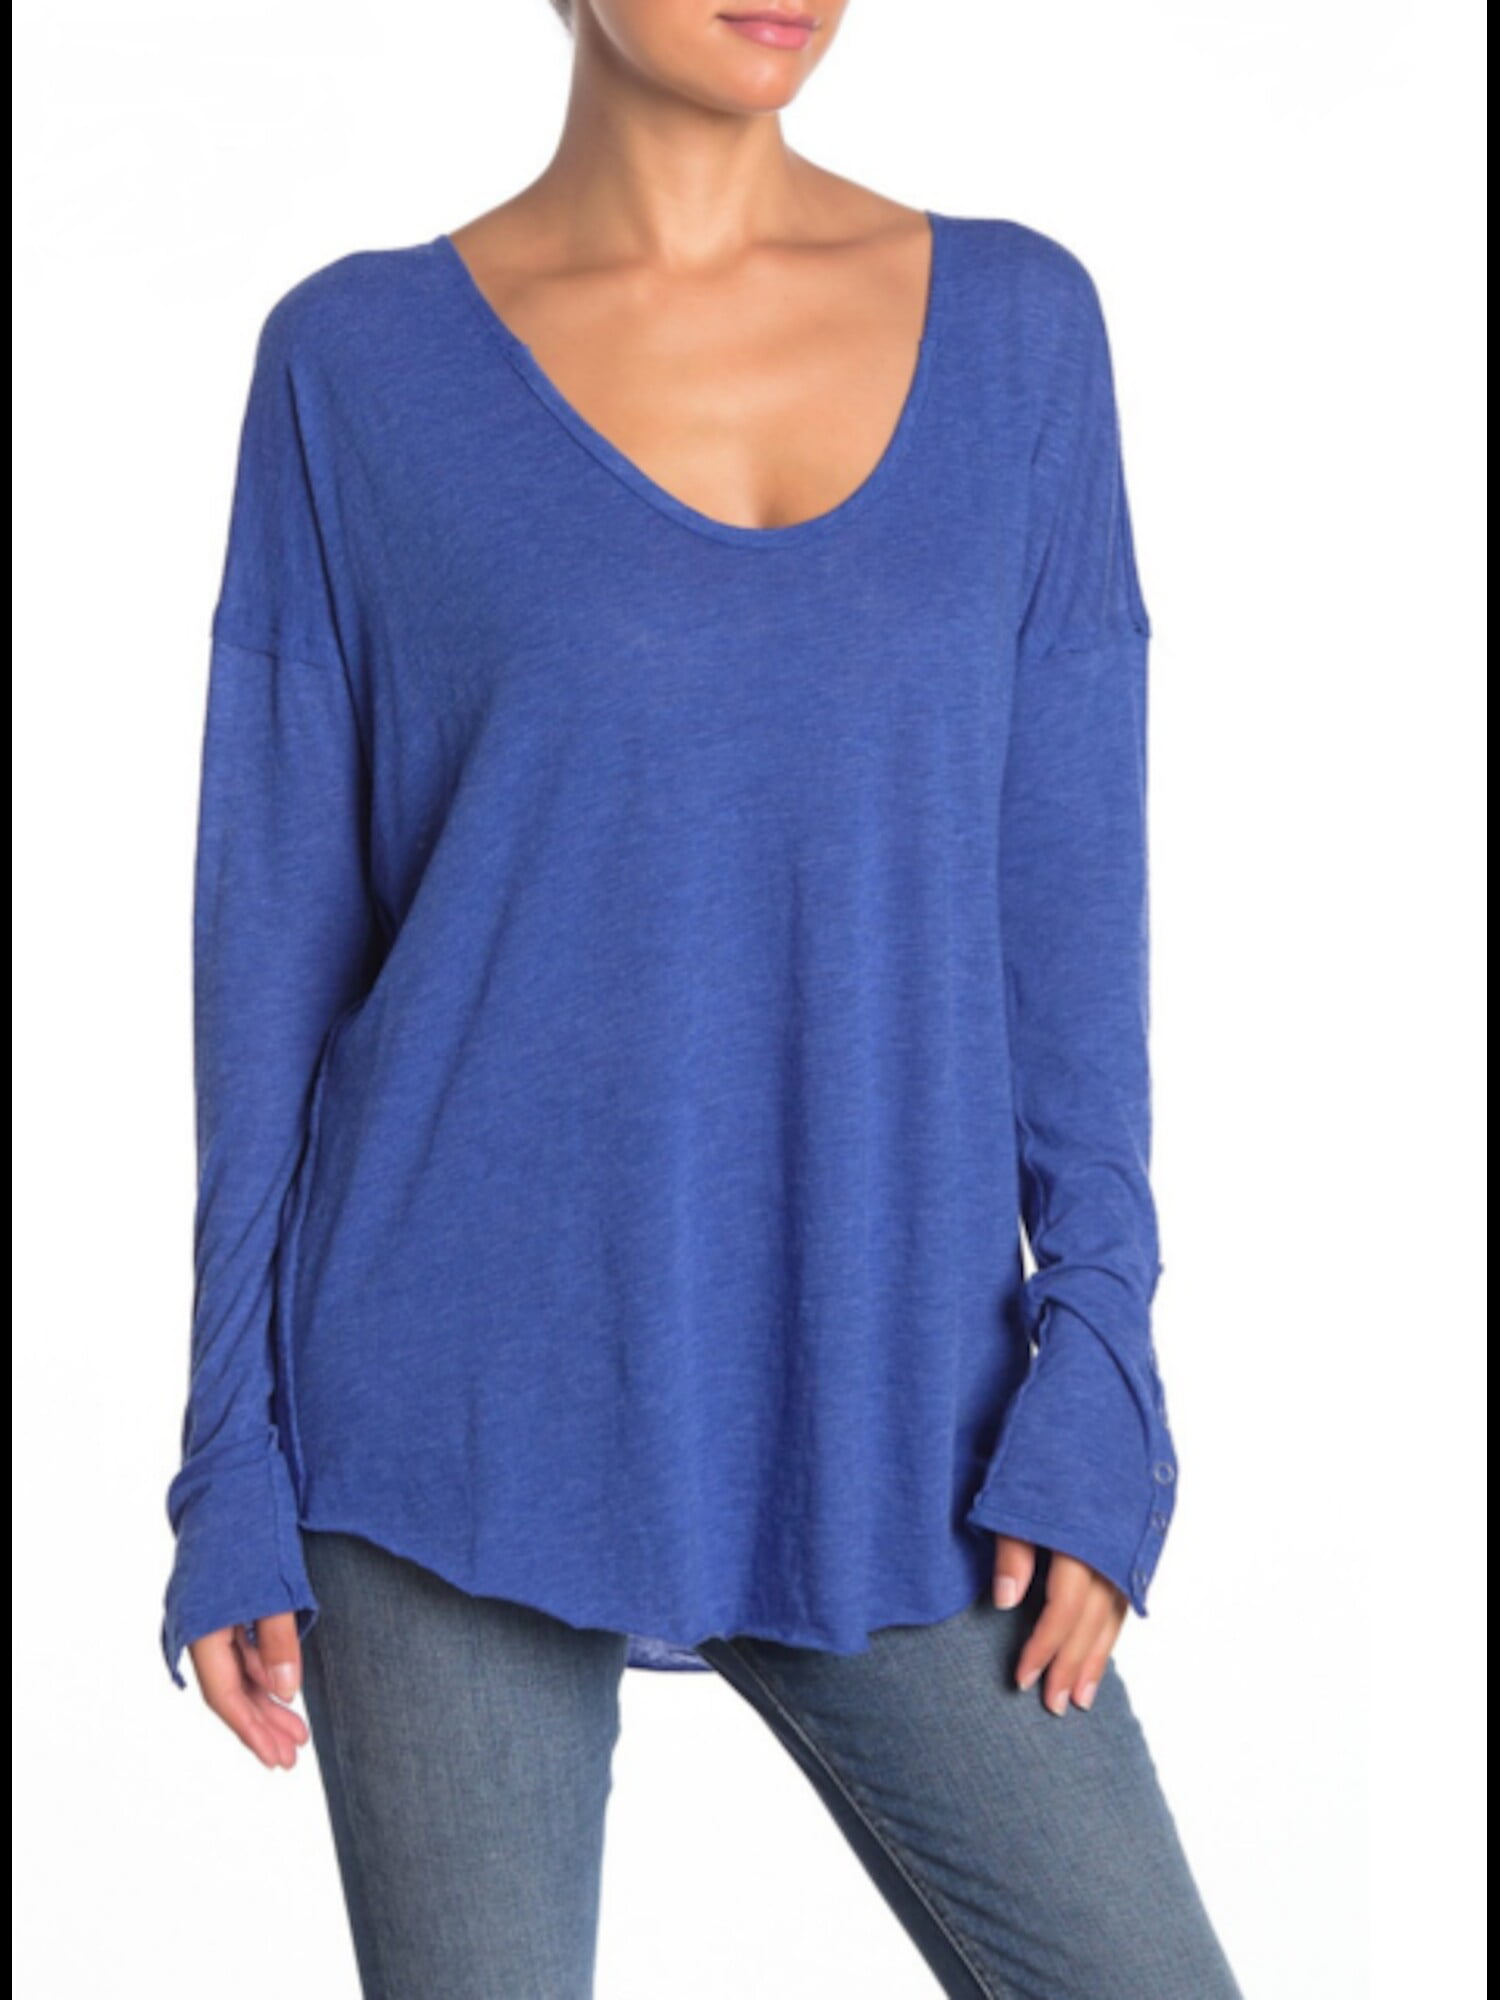 Womens Long Sleeve Scoop Neck Top Cotton New Size 6 to 18 Indigo Blue Thumb Hole 